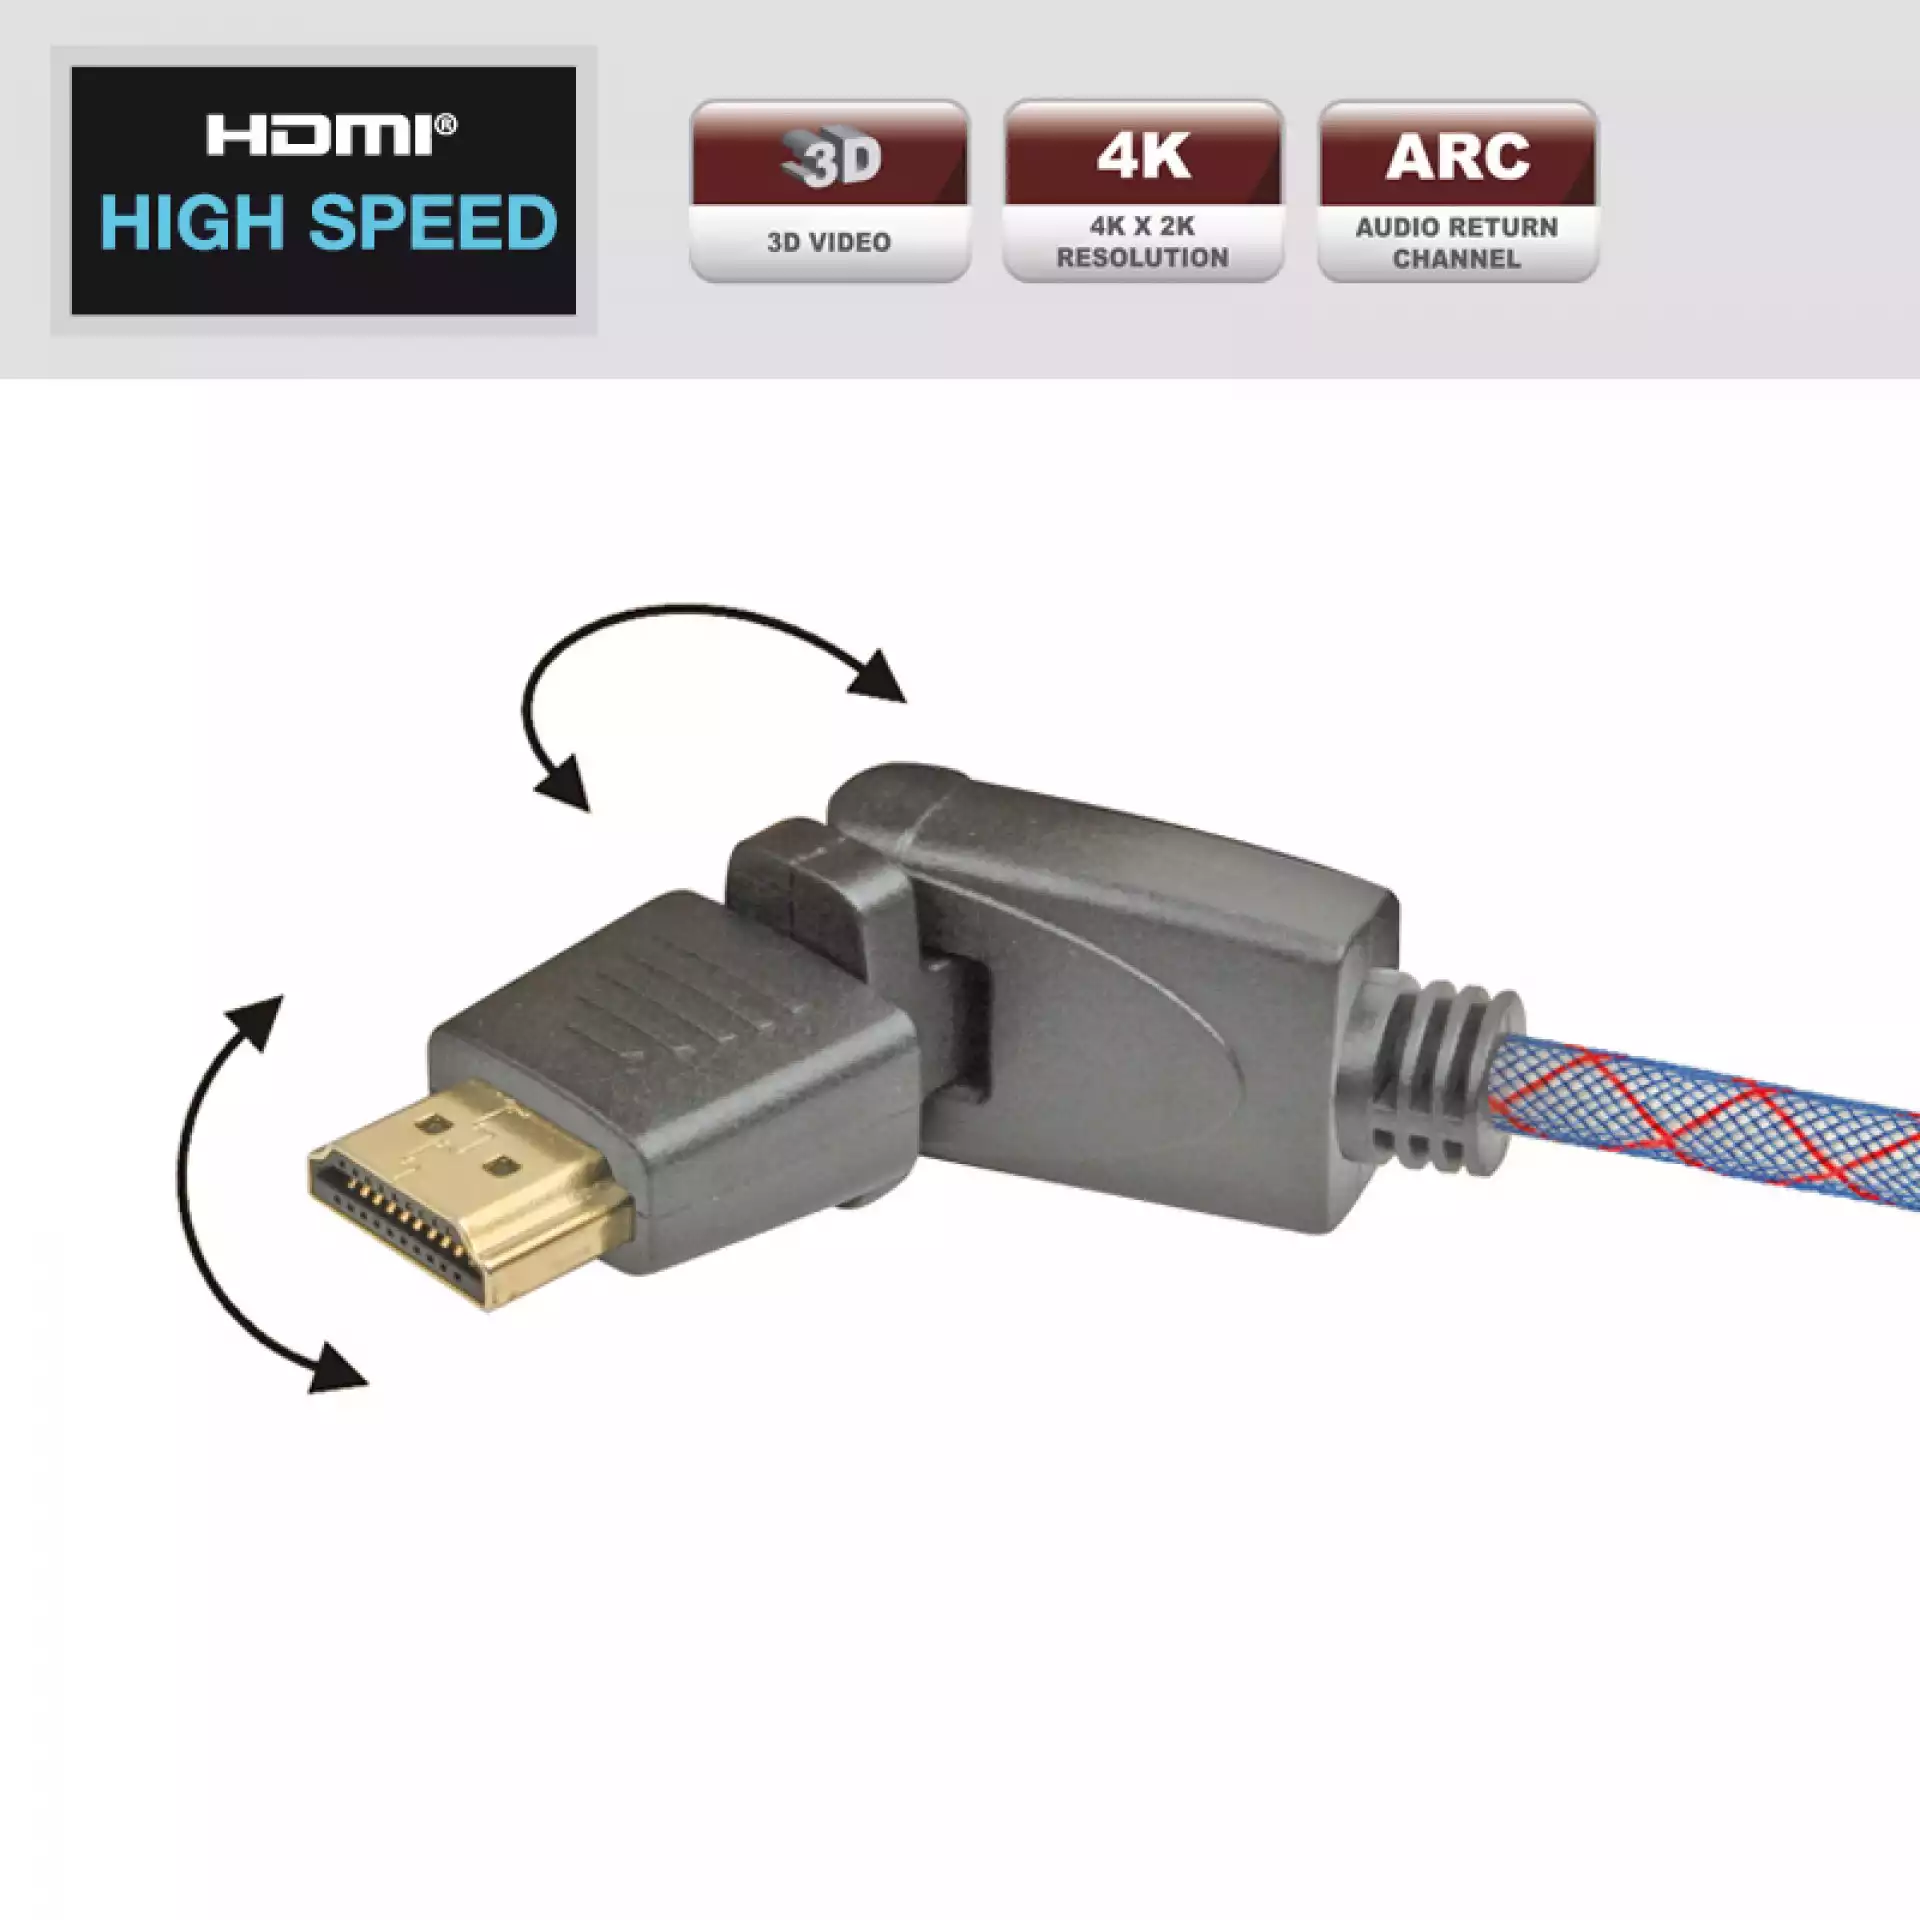 REAL CABLE HD E 360 2m